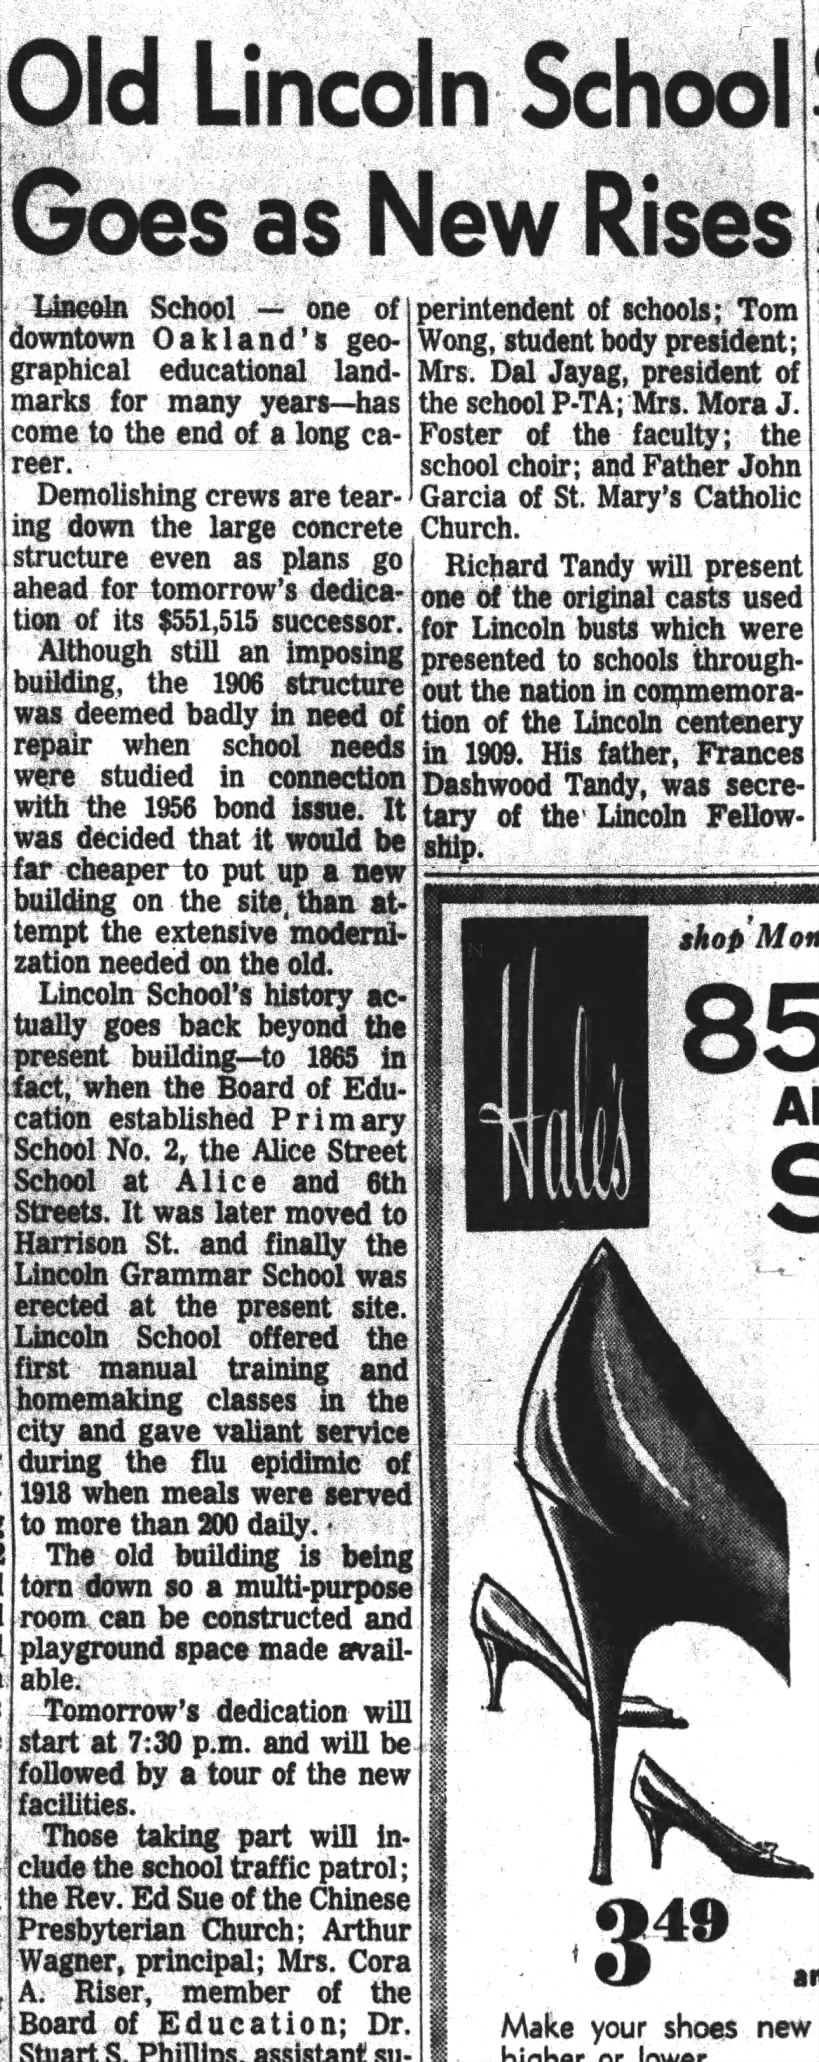 Old Lincoln School Goes and New Rises - Oakland Tribune Apr 16, 1961